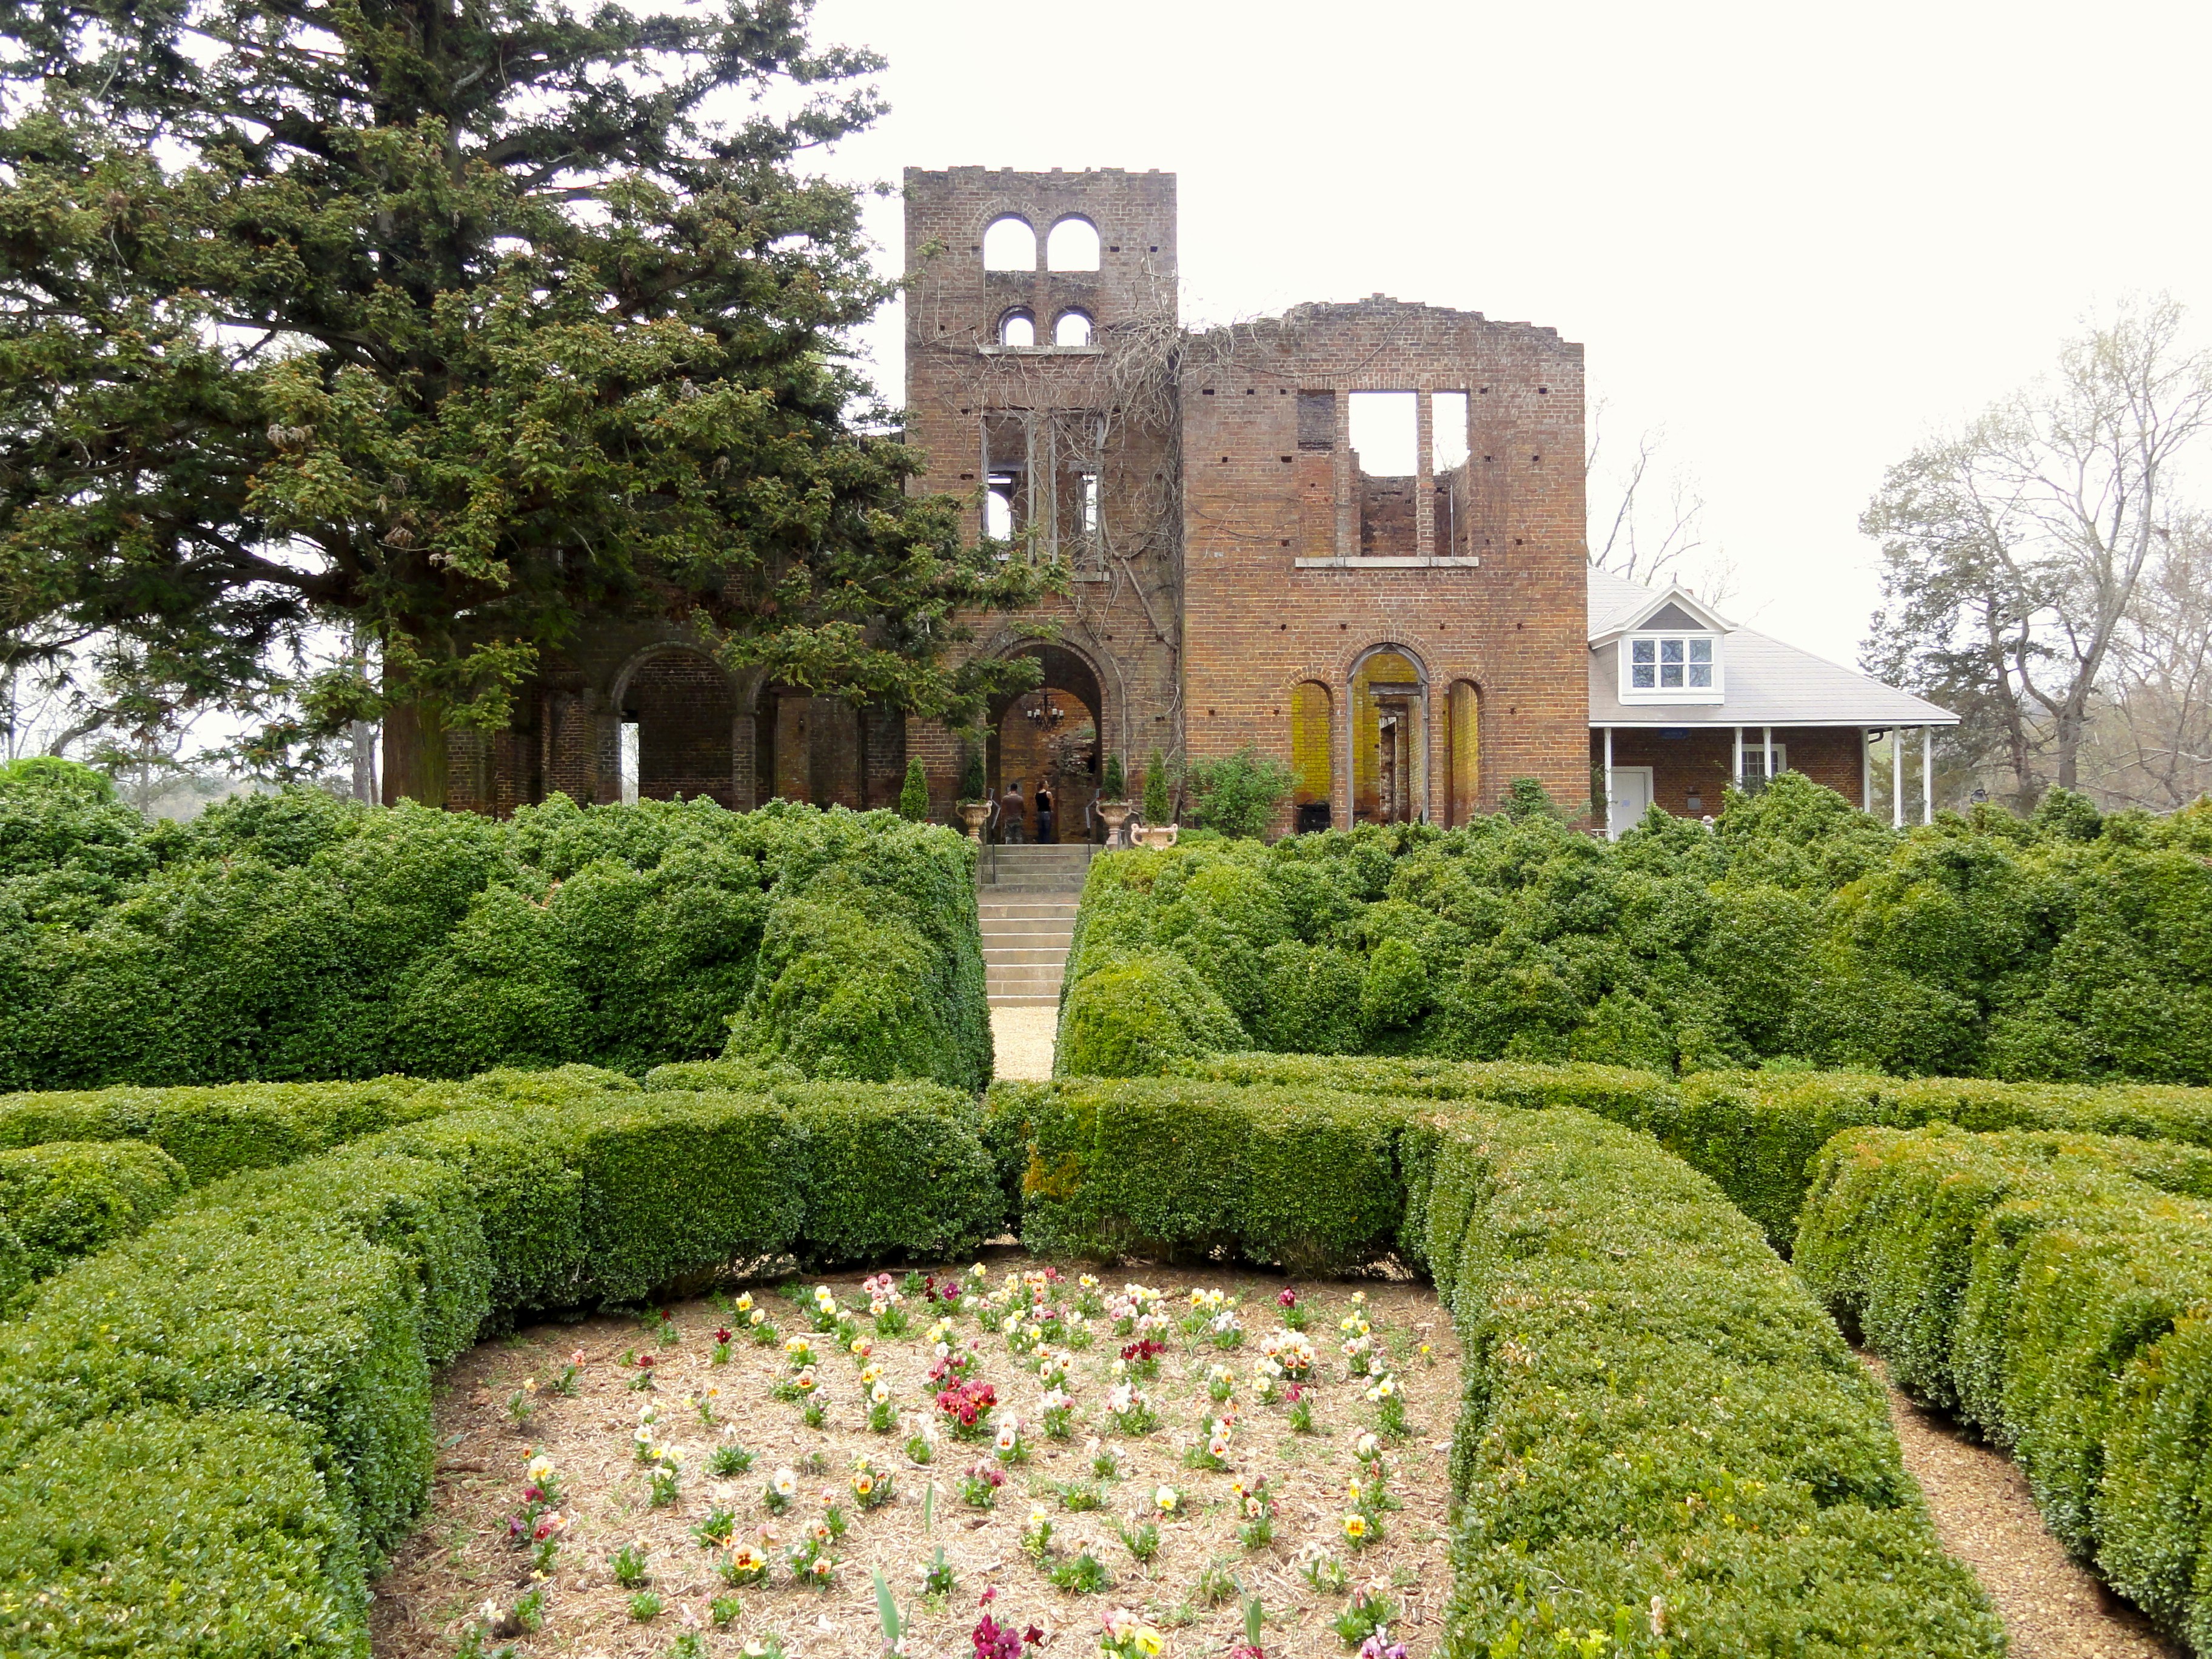 The brick ruins of an ornate Italianate villa overlooks trimmed hedges and flower gardens at this Adairsville agritourism destination